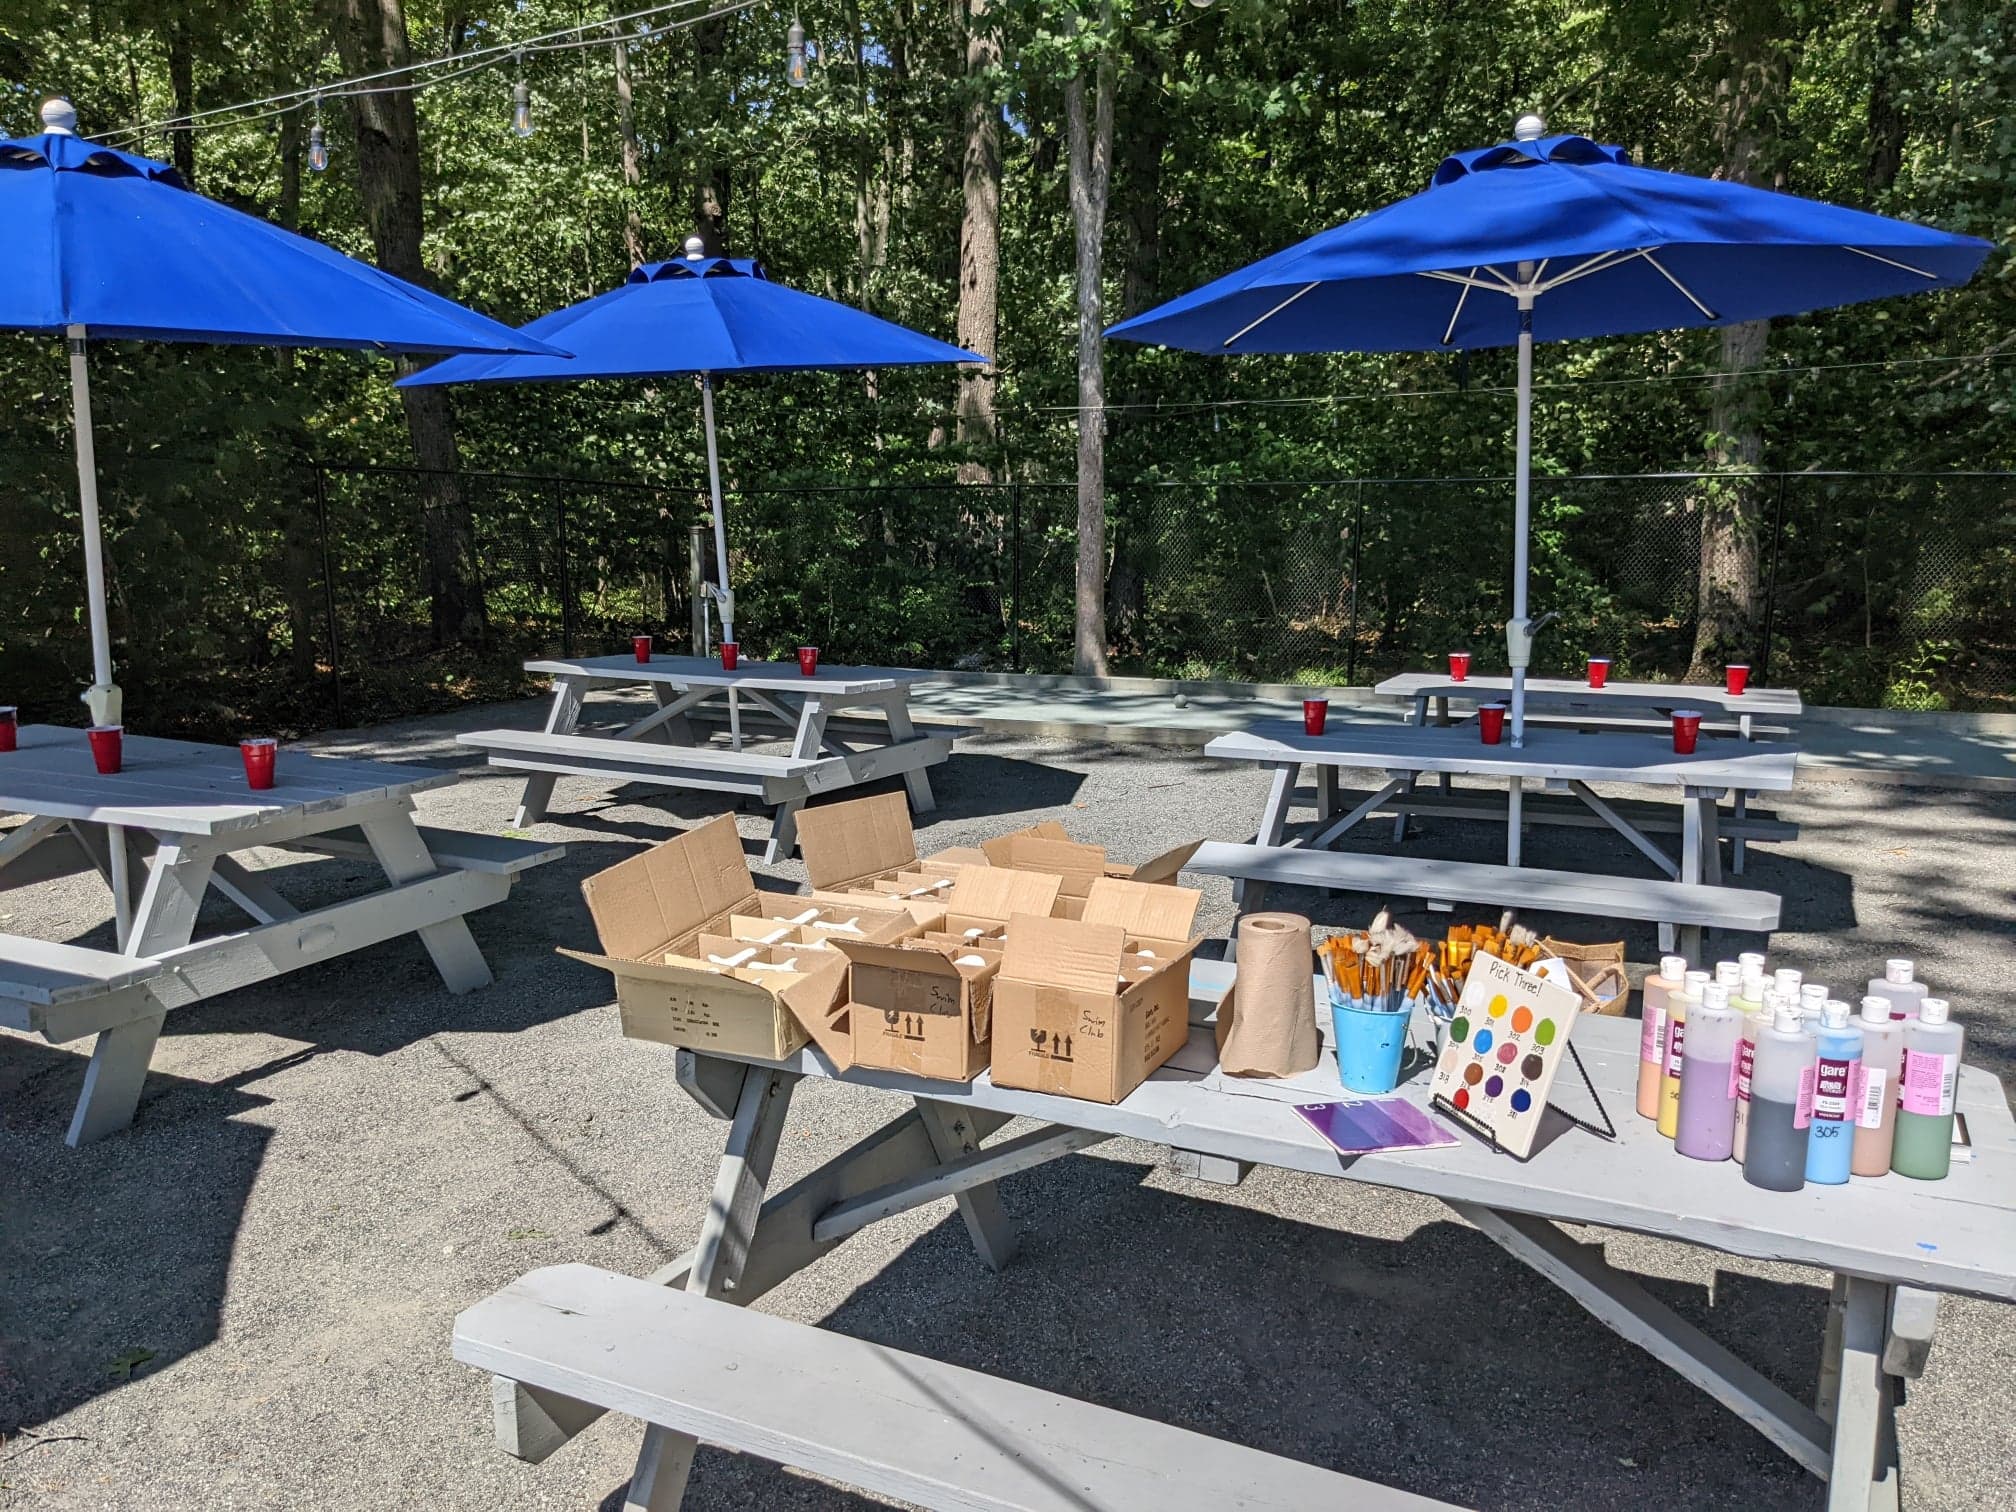 A picnic table with blue umbrellas and boxes of food.